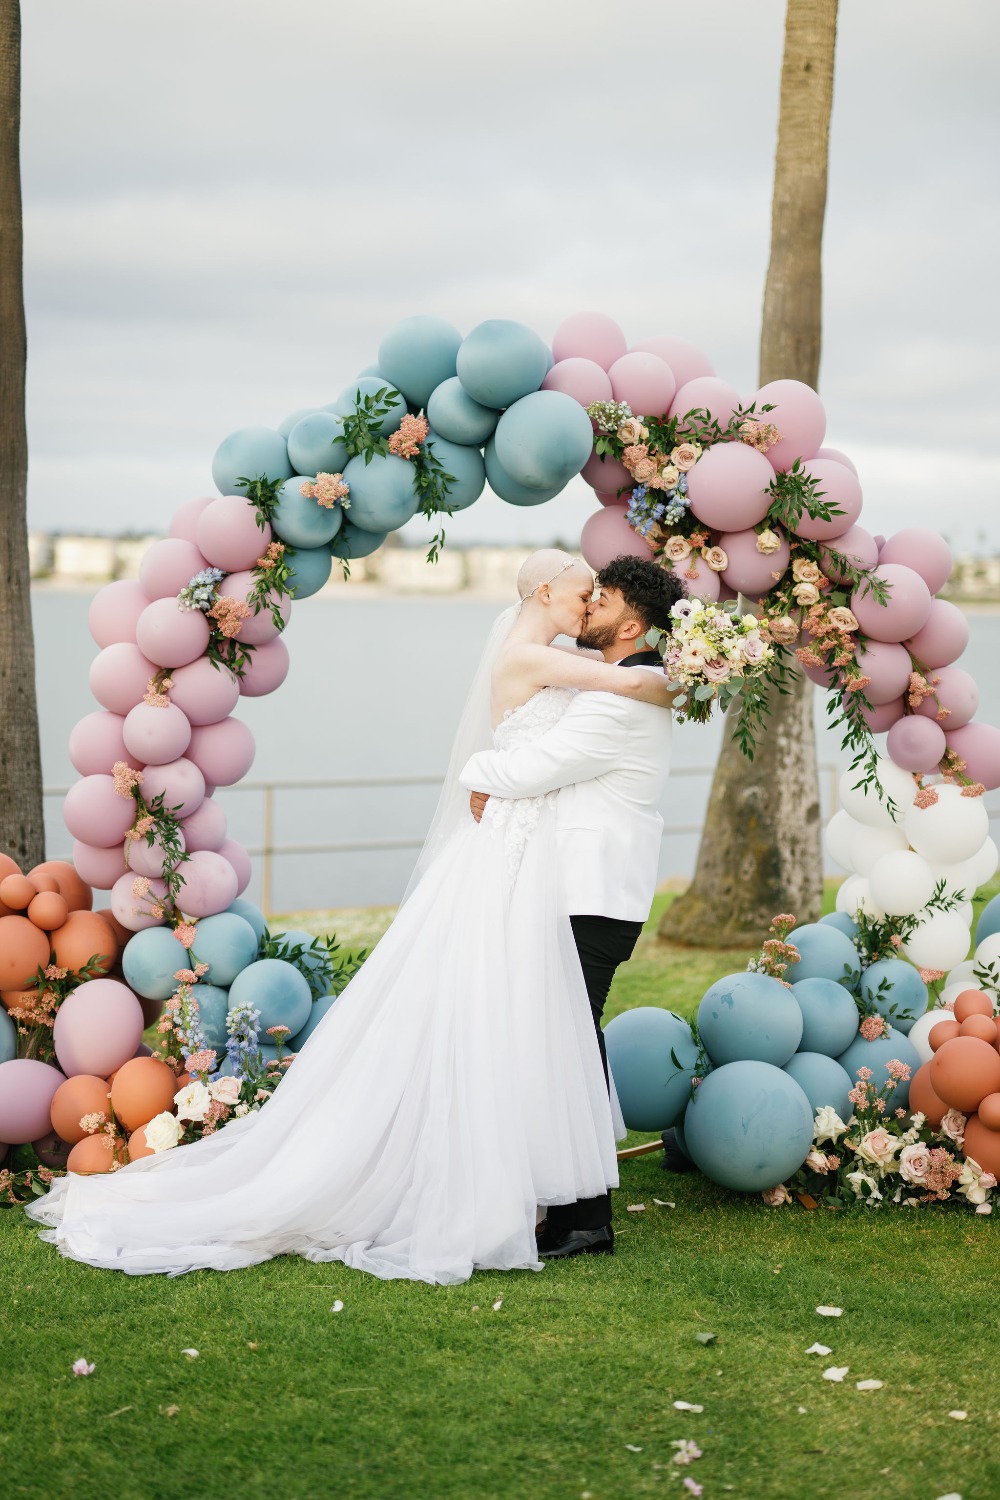 This Fairytale Wedding Was Planned In Just Two Weeks!